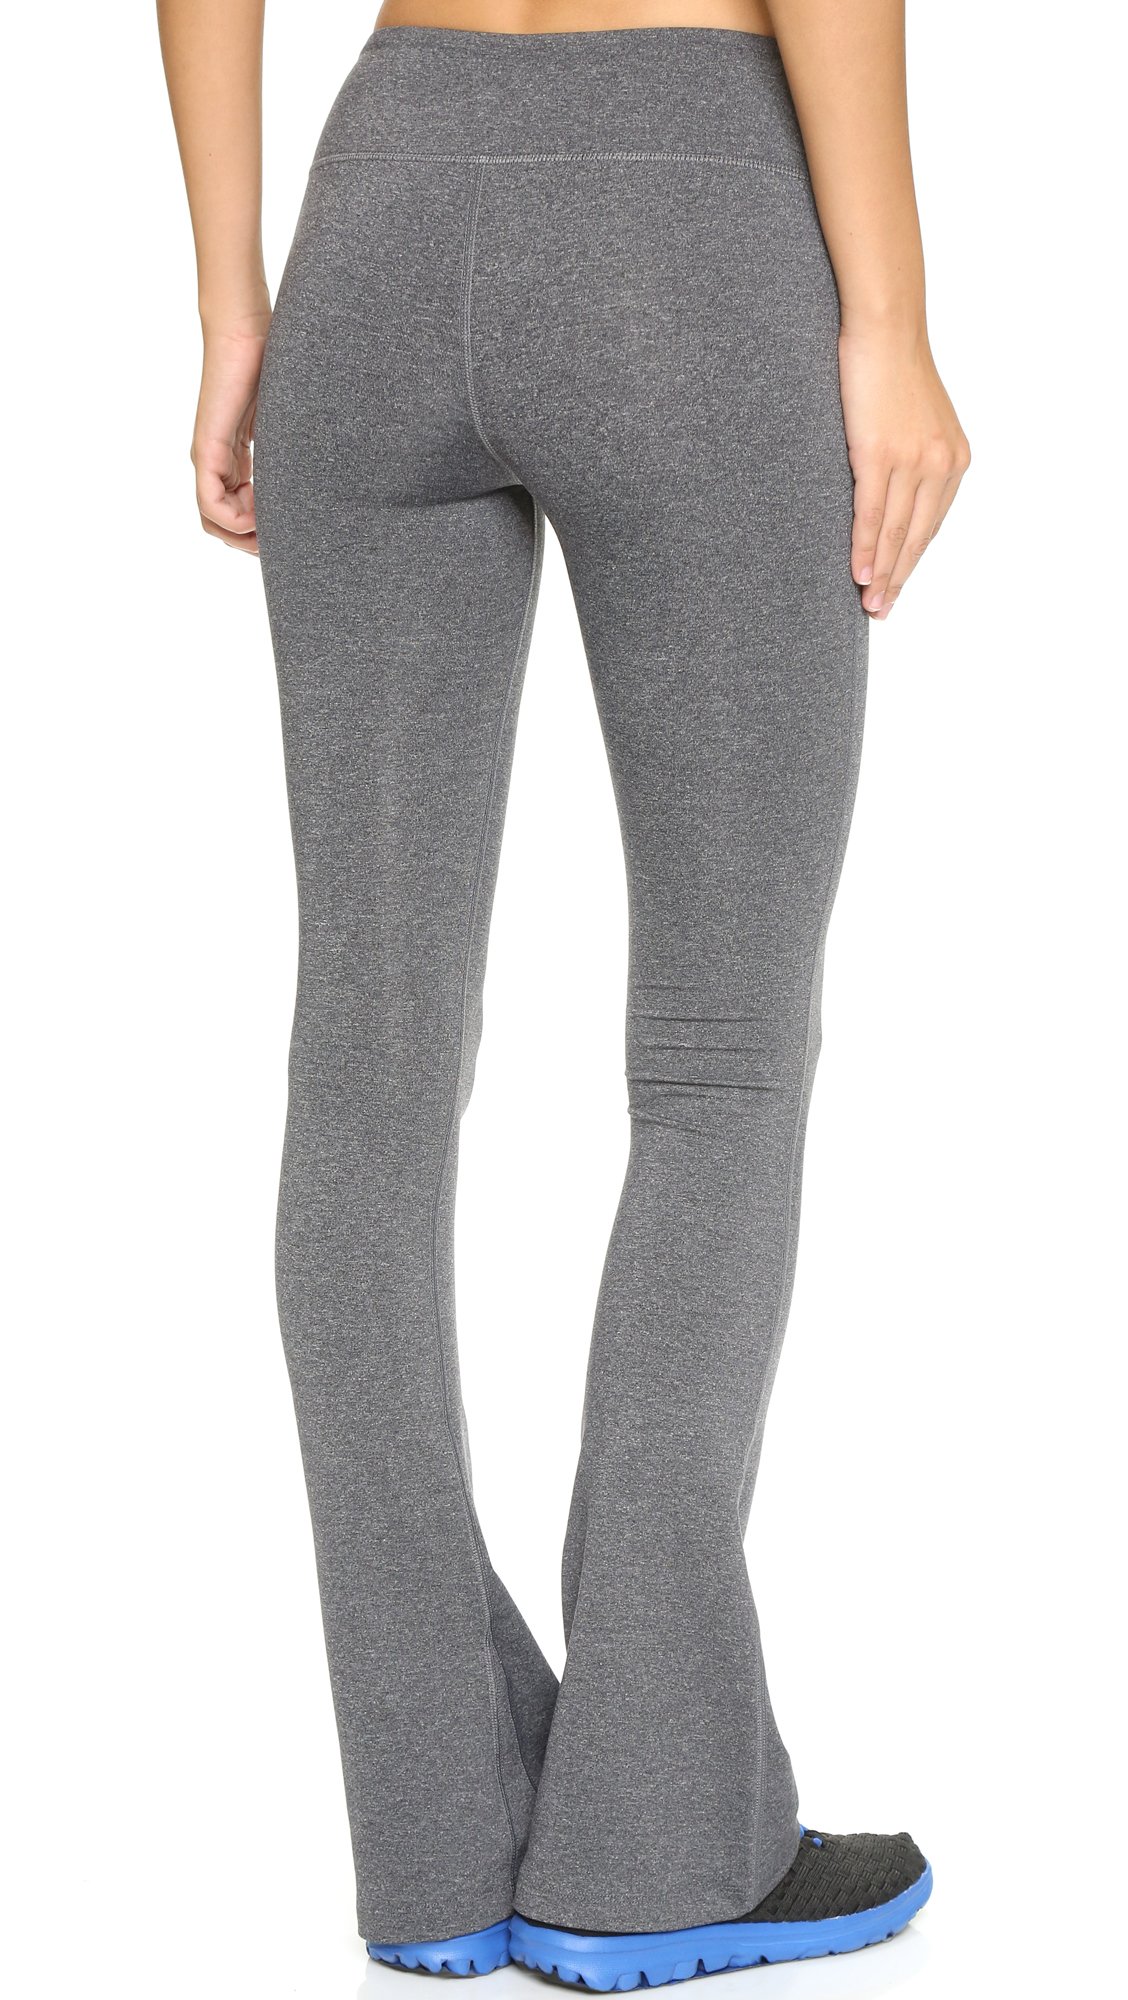 What To Wear With Grey Flare Leggings For Women's